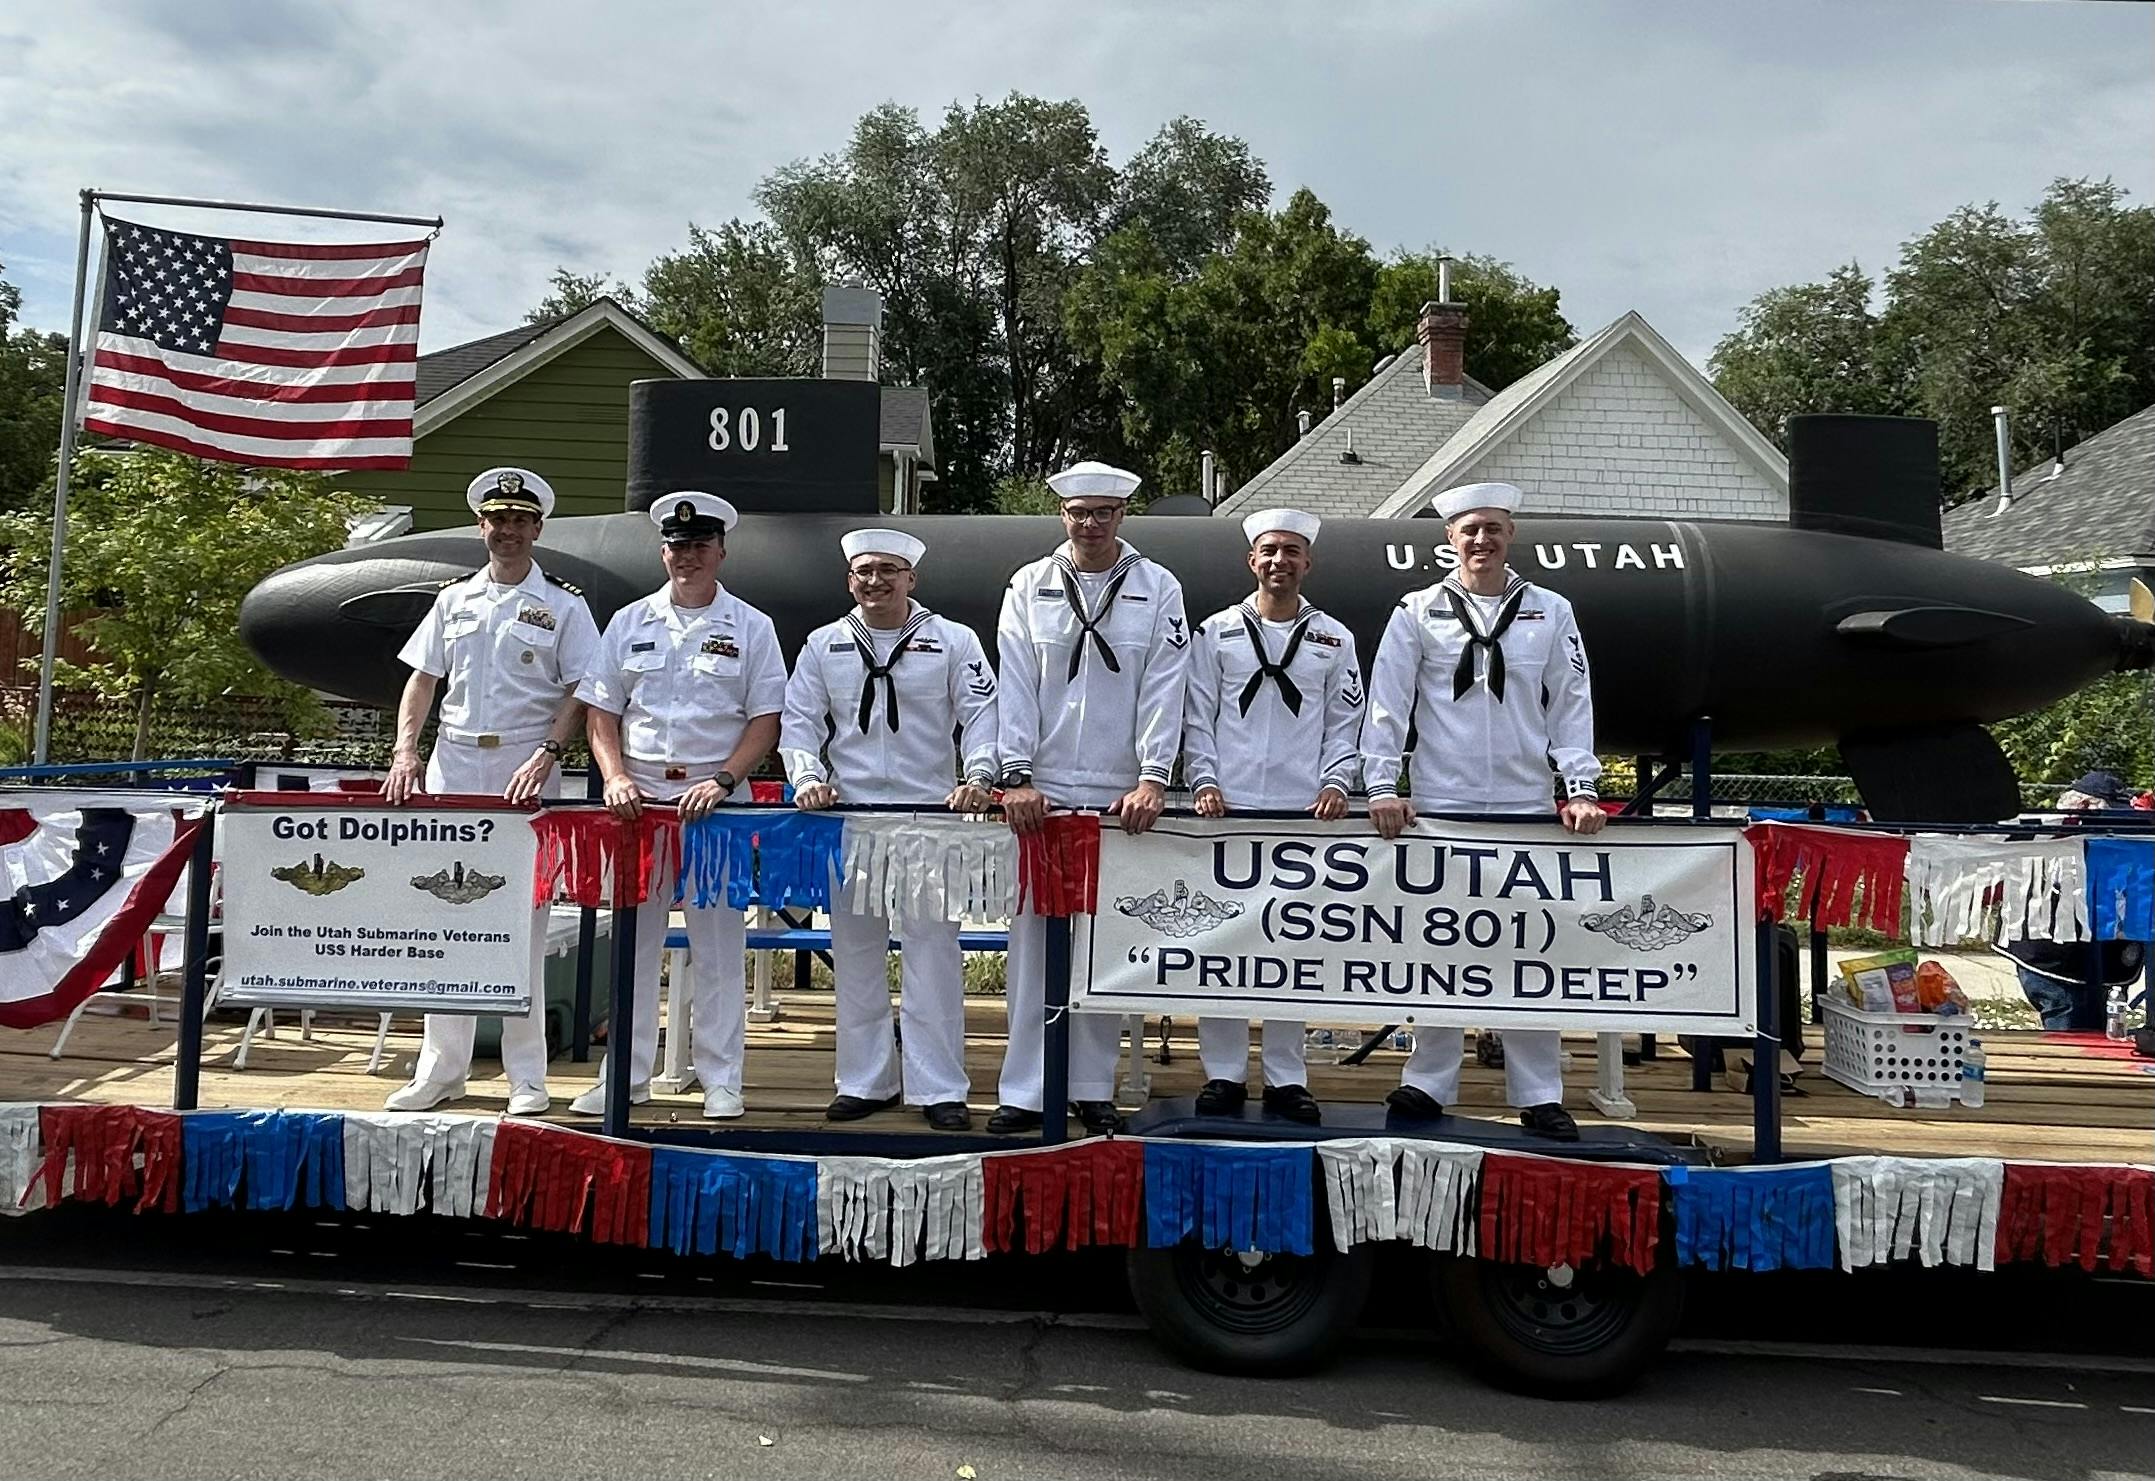 Captain Kos and crew pictured aboard USS Utah parade float at Days of 47 Parade.